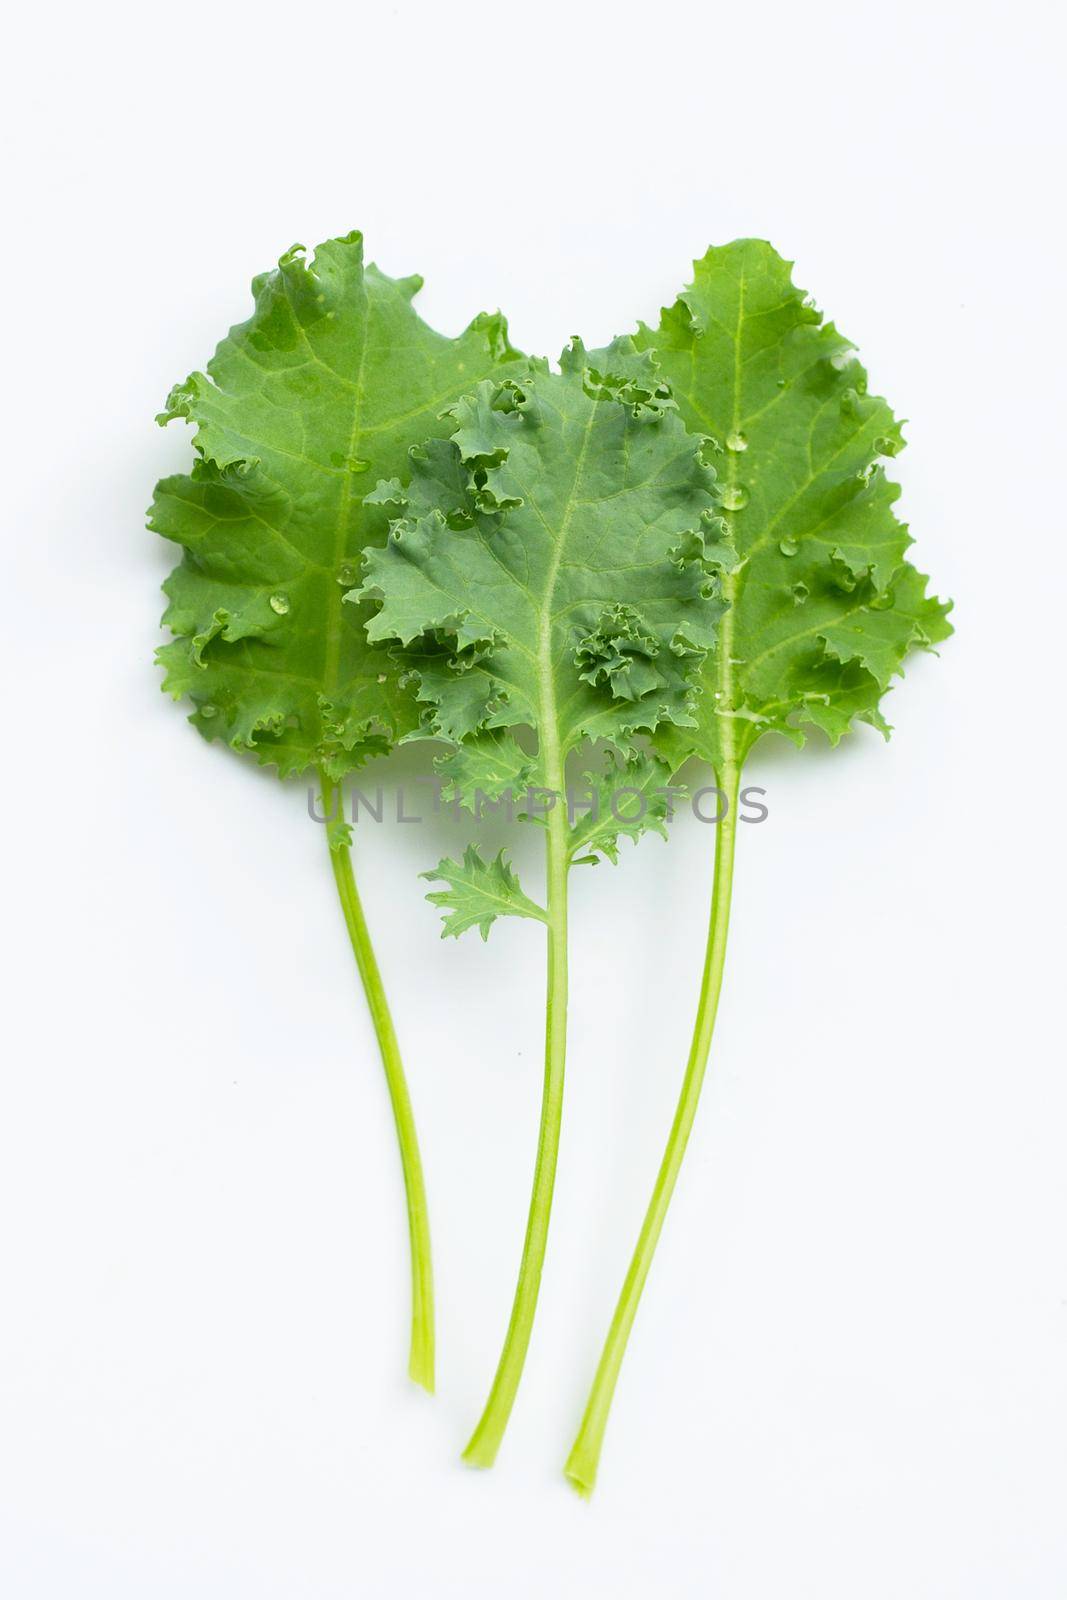 Kale leaves on white background. by Bowonpat